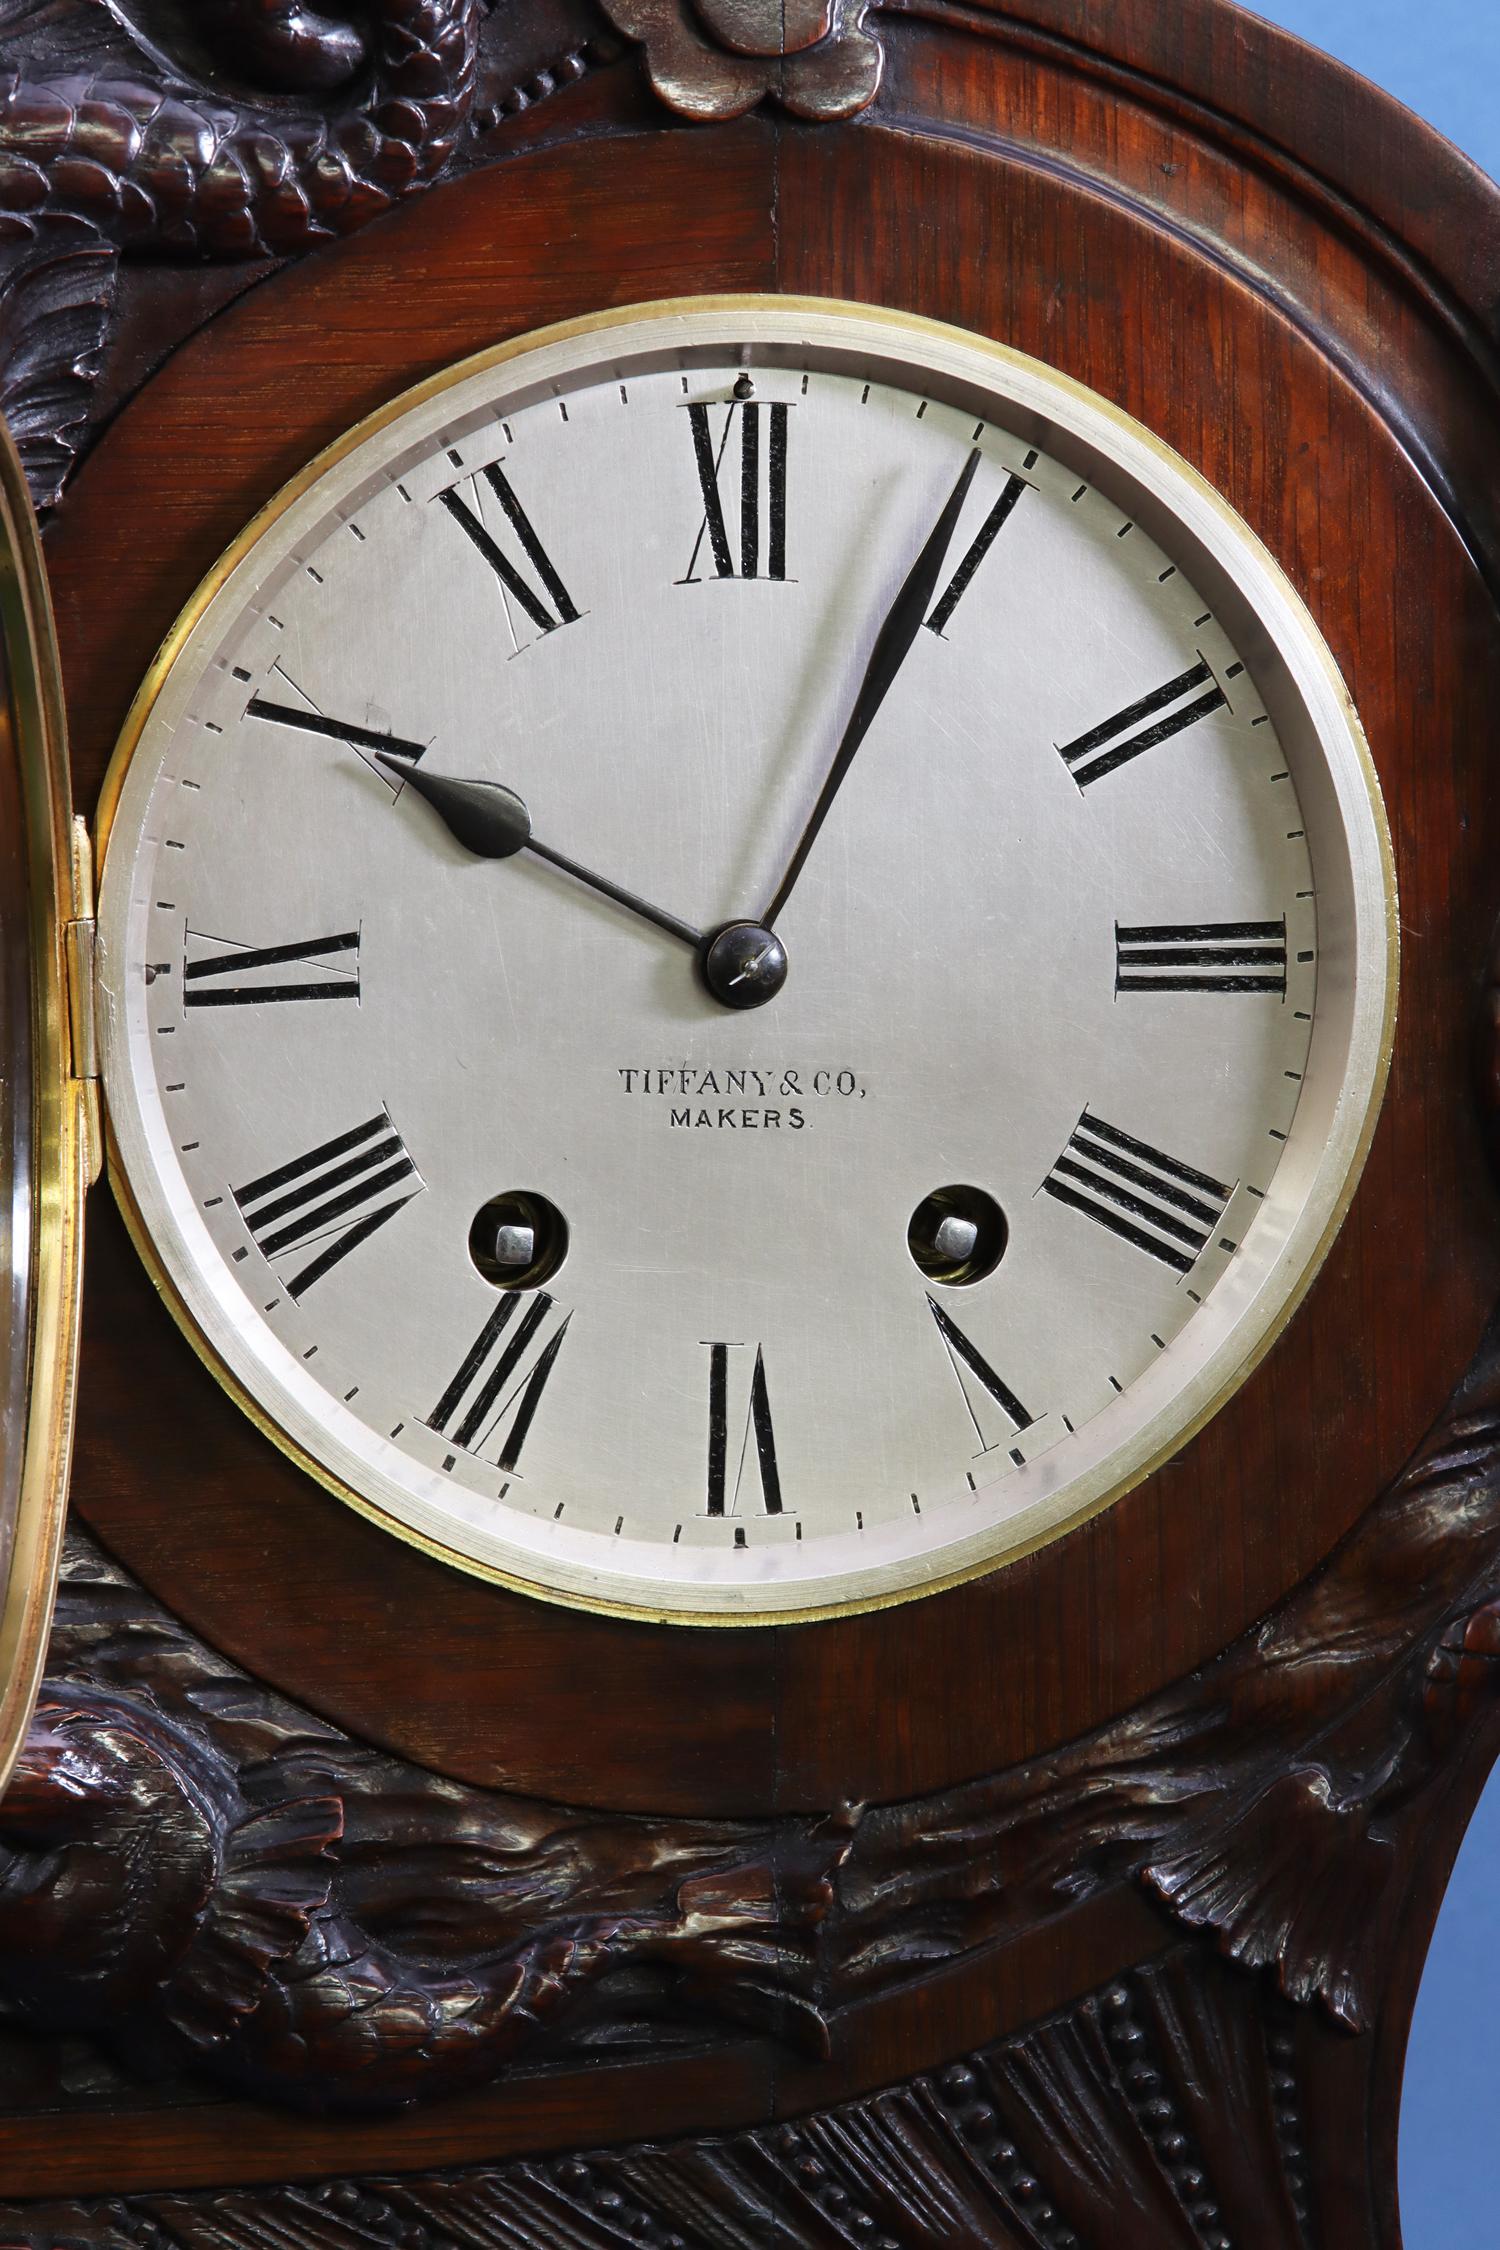 c.1910 Rare Double Dial Clock with Perpetual Calendar by Tiffany & Co., Makers.

g178

Tiffany & Co., Makers, New York.

The shaped oak case is decorated with carved sea serpents and houses the clock and perpetual calendar side by side.

The